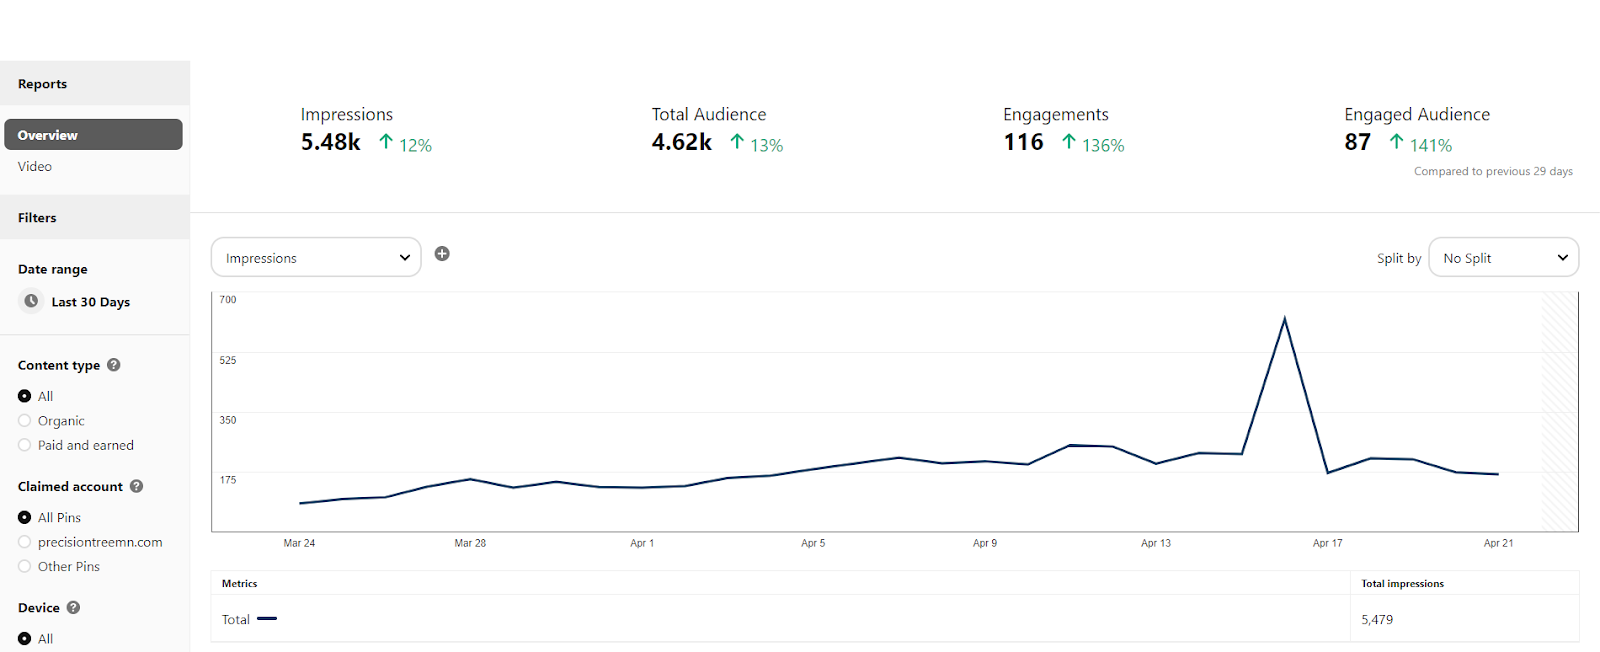 Pinterest analytics dashboard summarizing account impressions, total audience, engagements, and engaged audience